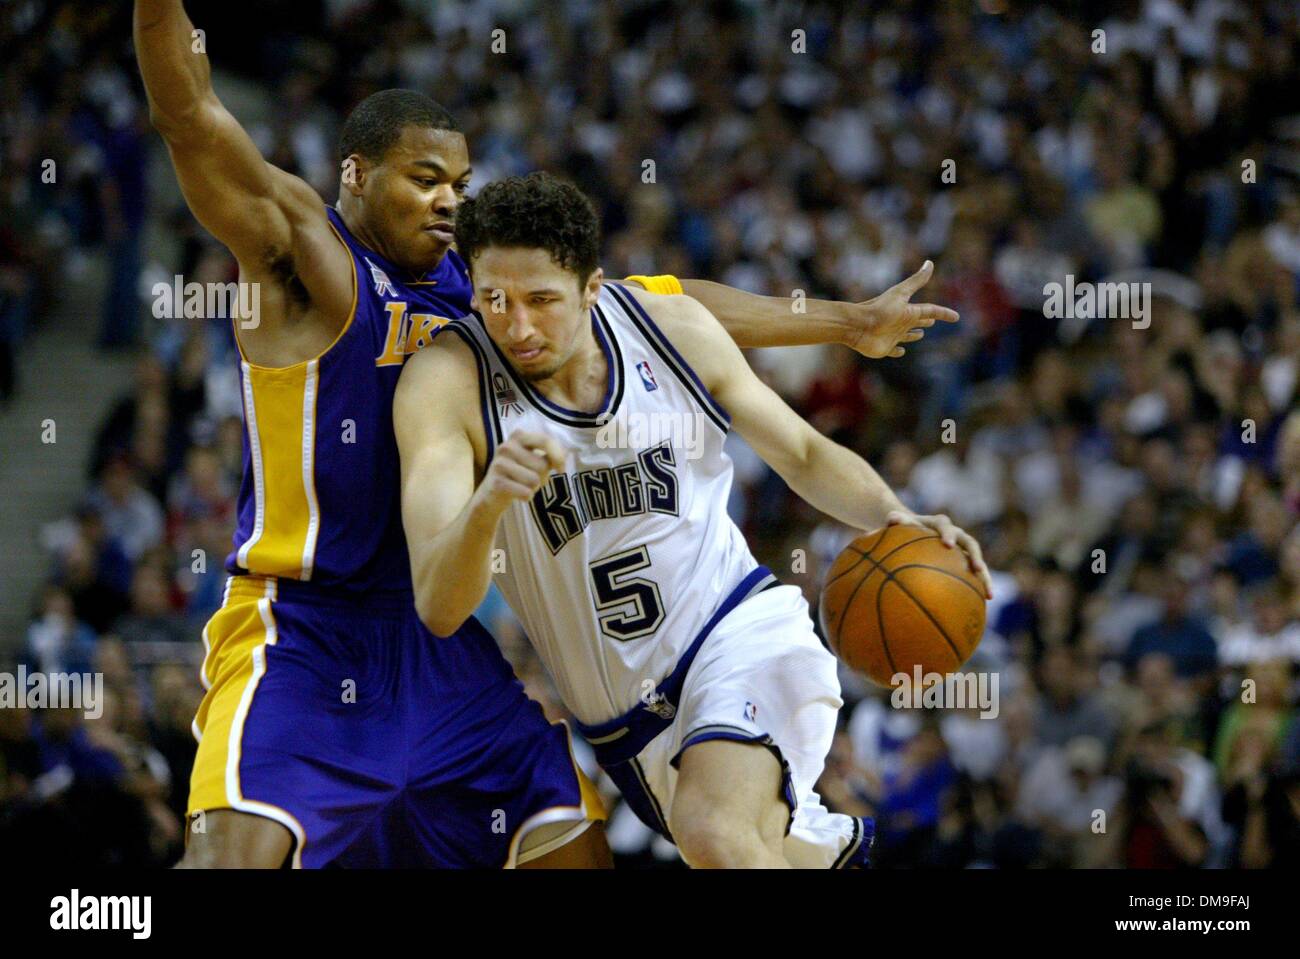 Hedo Turkoglu drives to the basket. Picture taken at Arco Arena, Sunday March 24, 2002. Kings vs. the lakers. Sacramento Bee/Bryan Patrick  /ZUMA Press Stock Photo